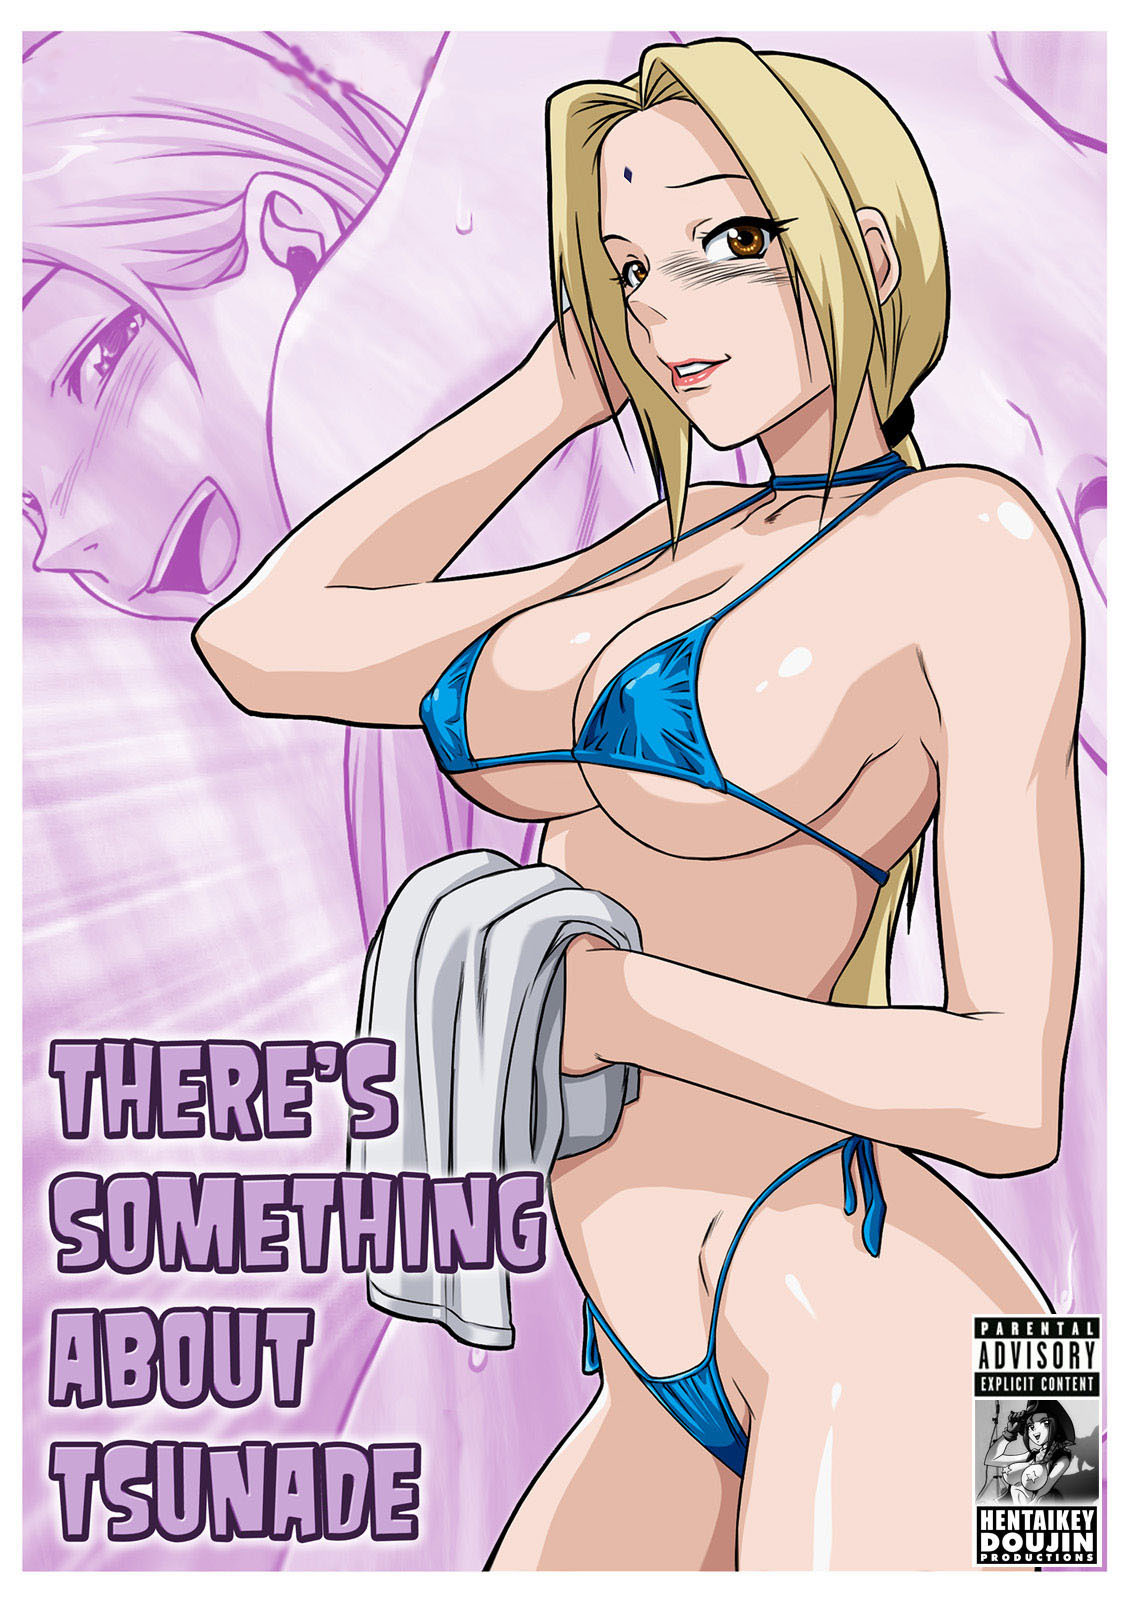 Melkor Mancin – Theres Something About Tsunade COMIC